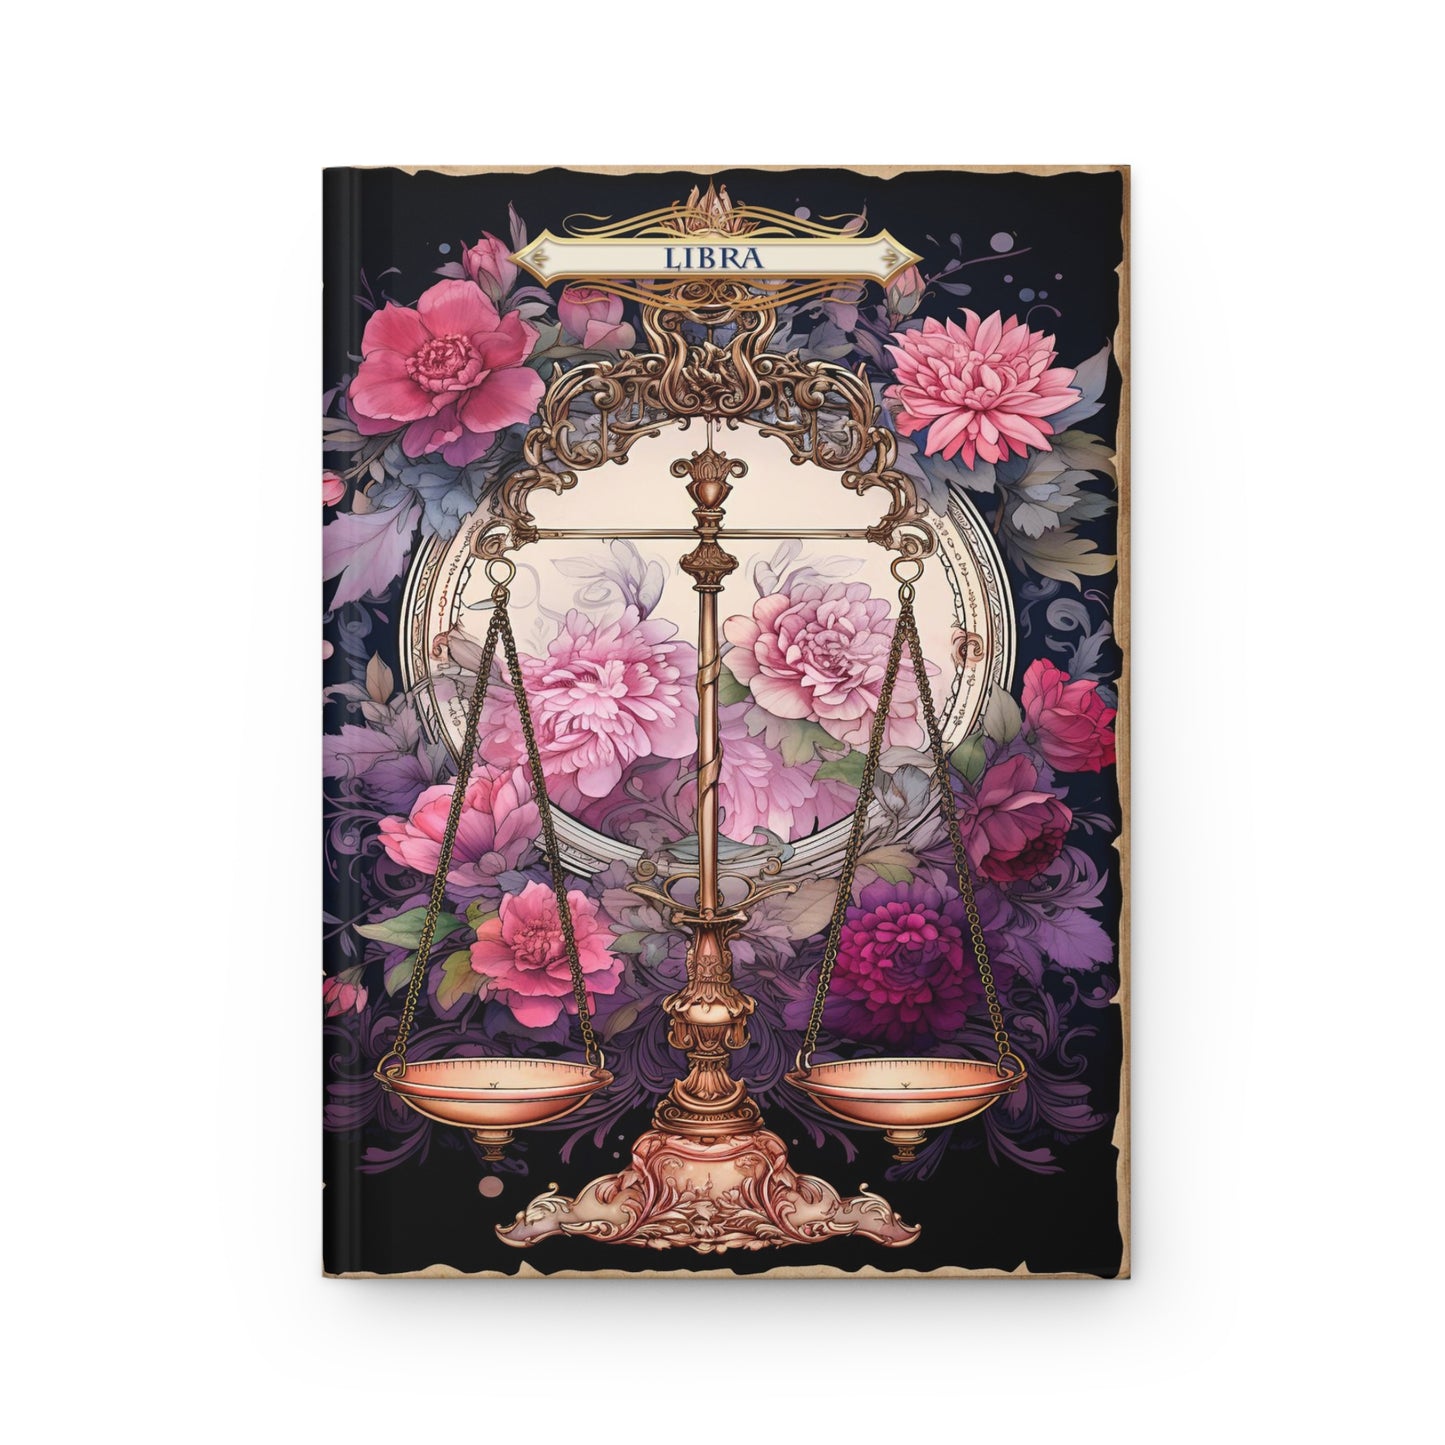 Libra - Floral Collection (Hardcover Journal Matte)